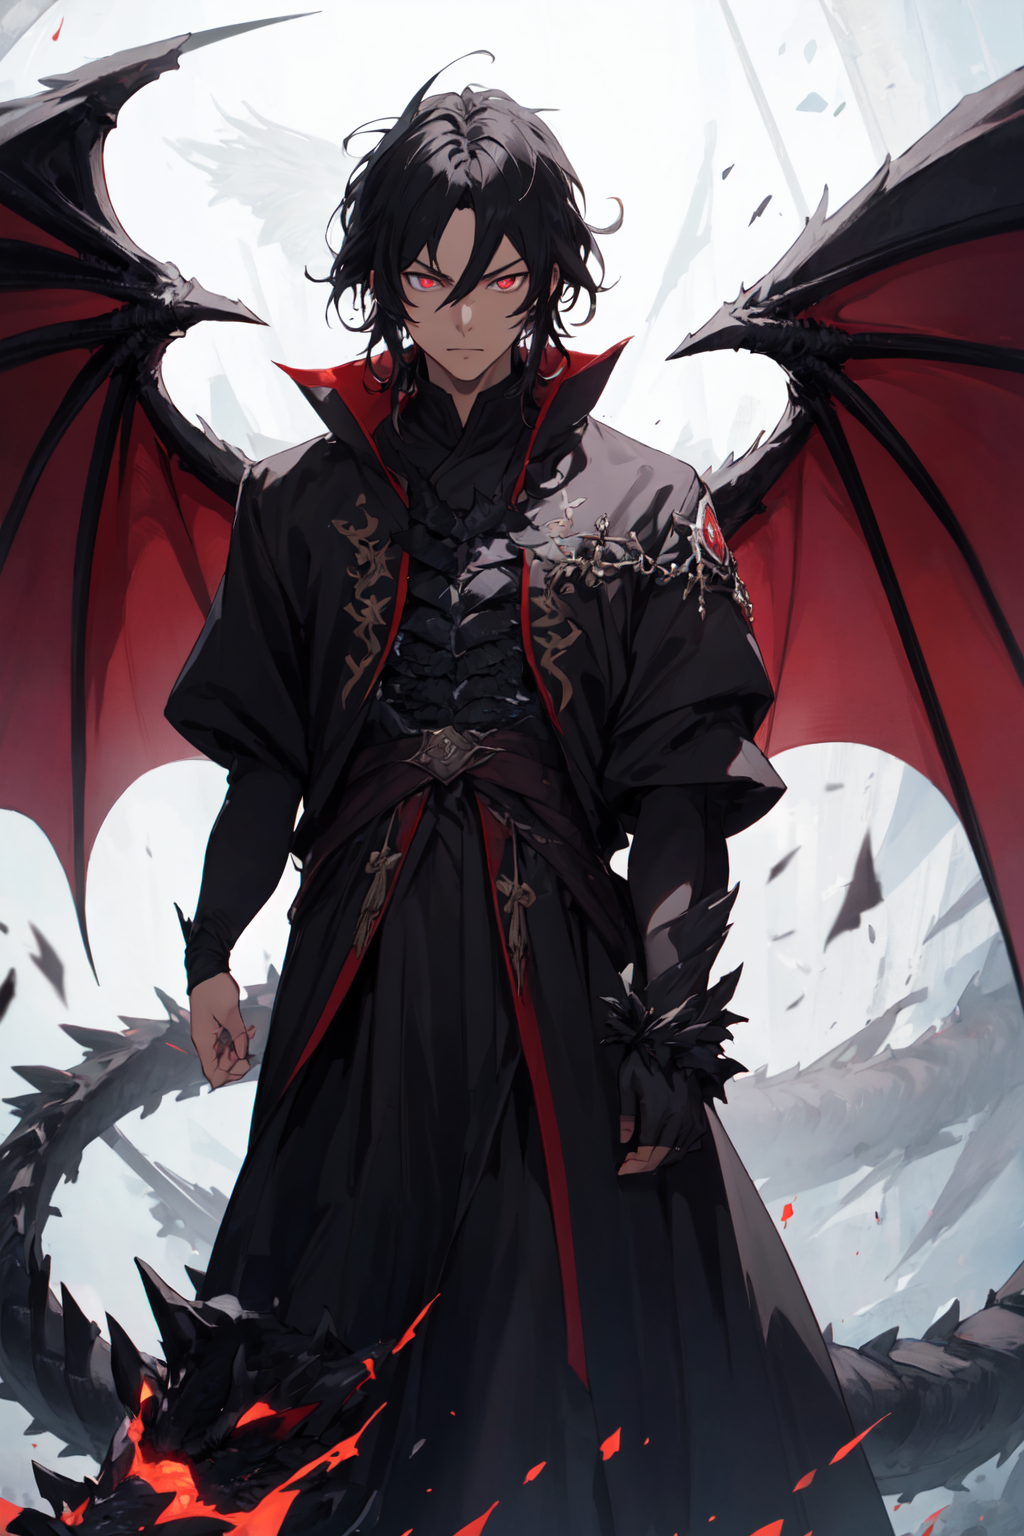 anime boy with dragon wings